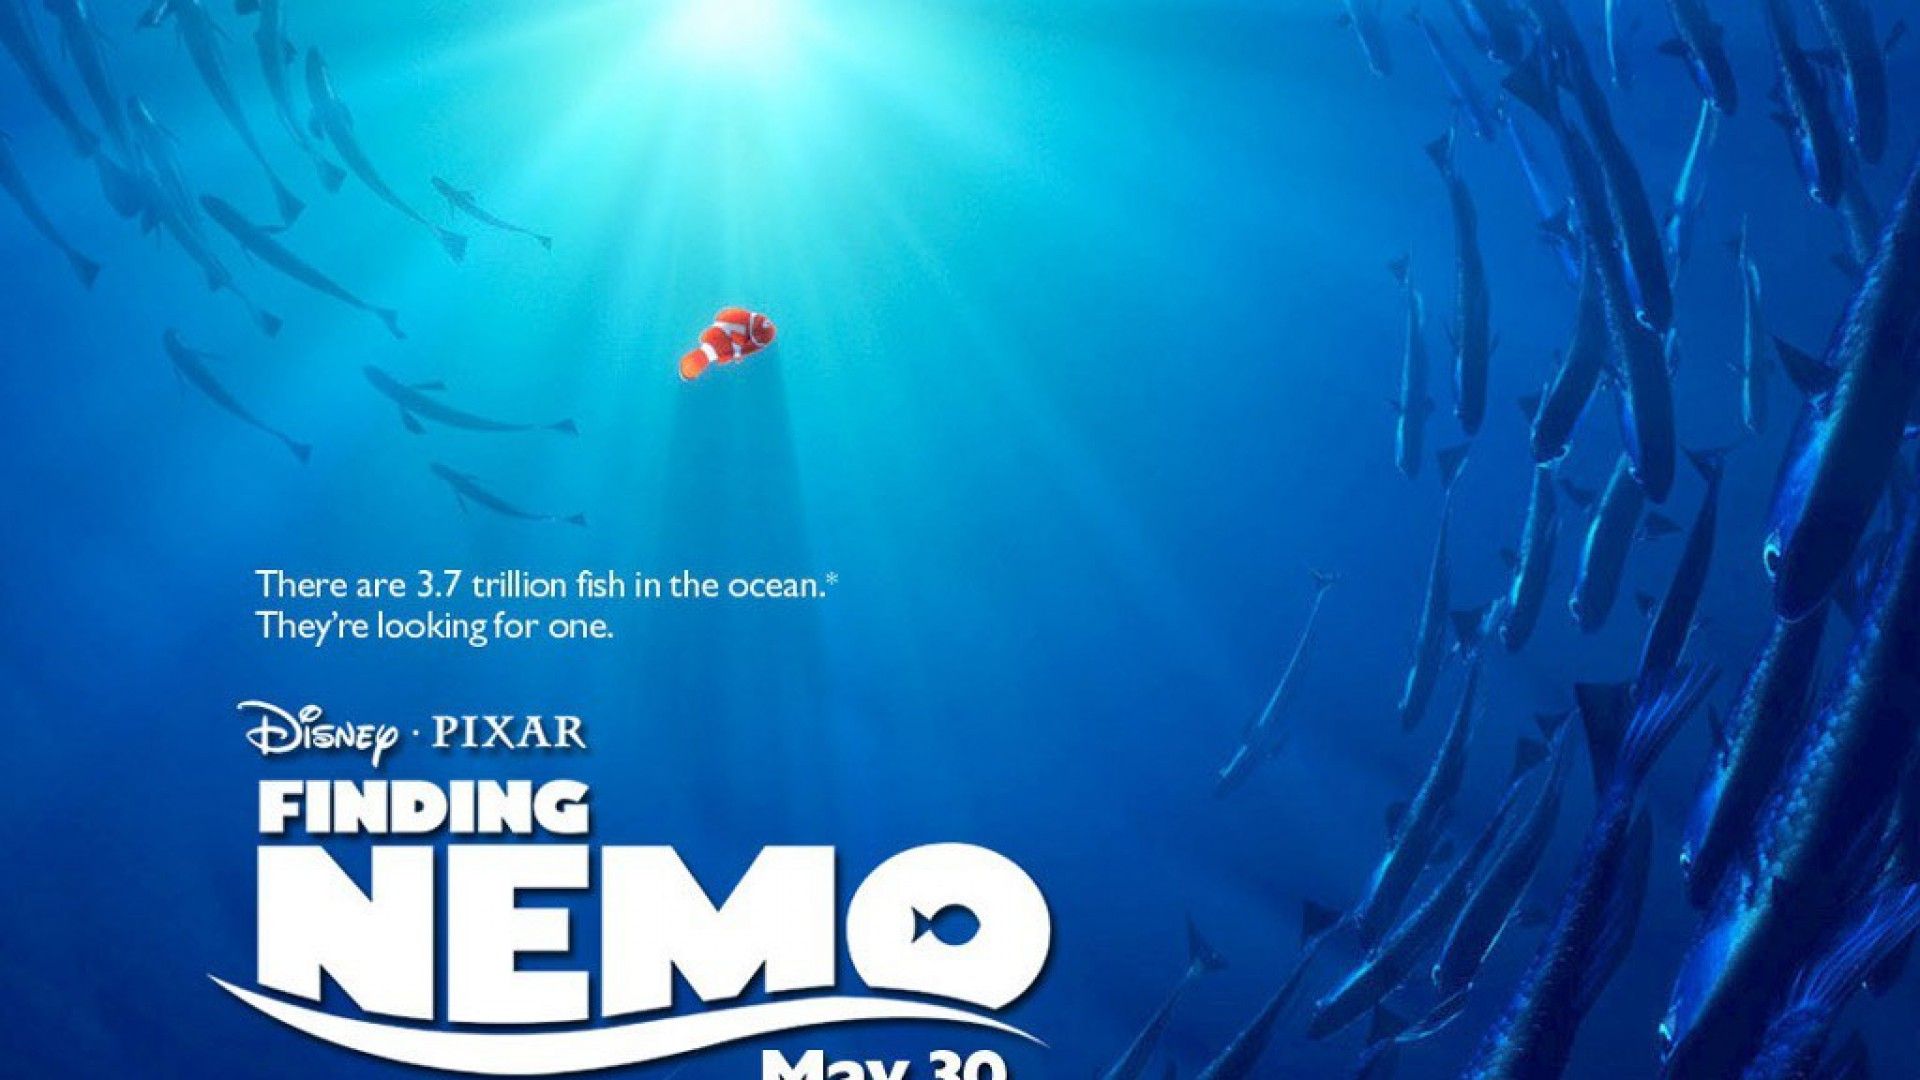 Finding Nemo Wallpaper Collections 4121 - HD Wallpapers Site